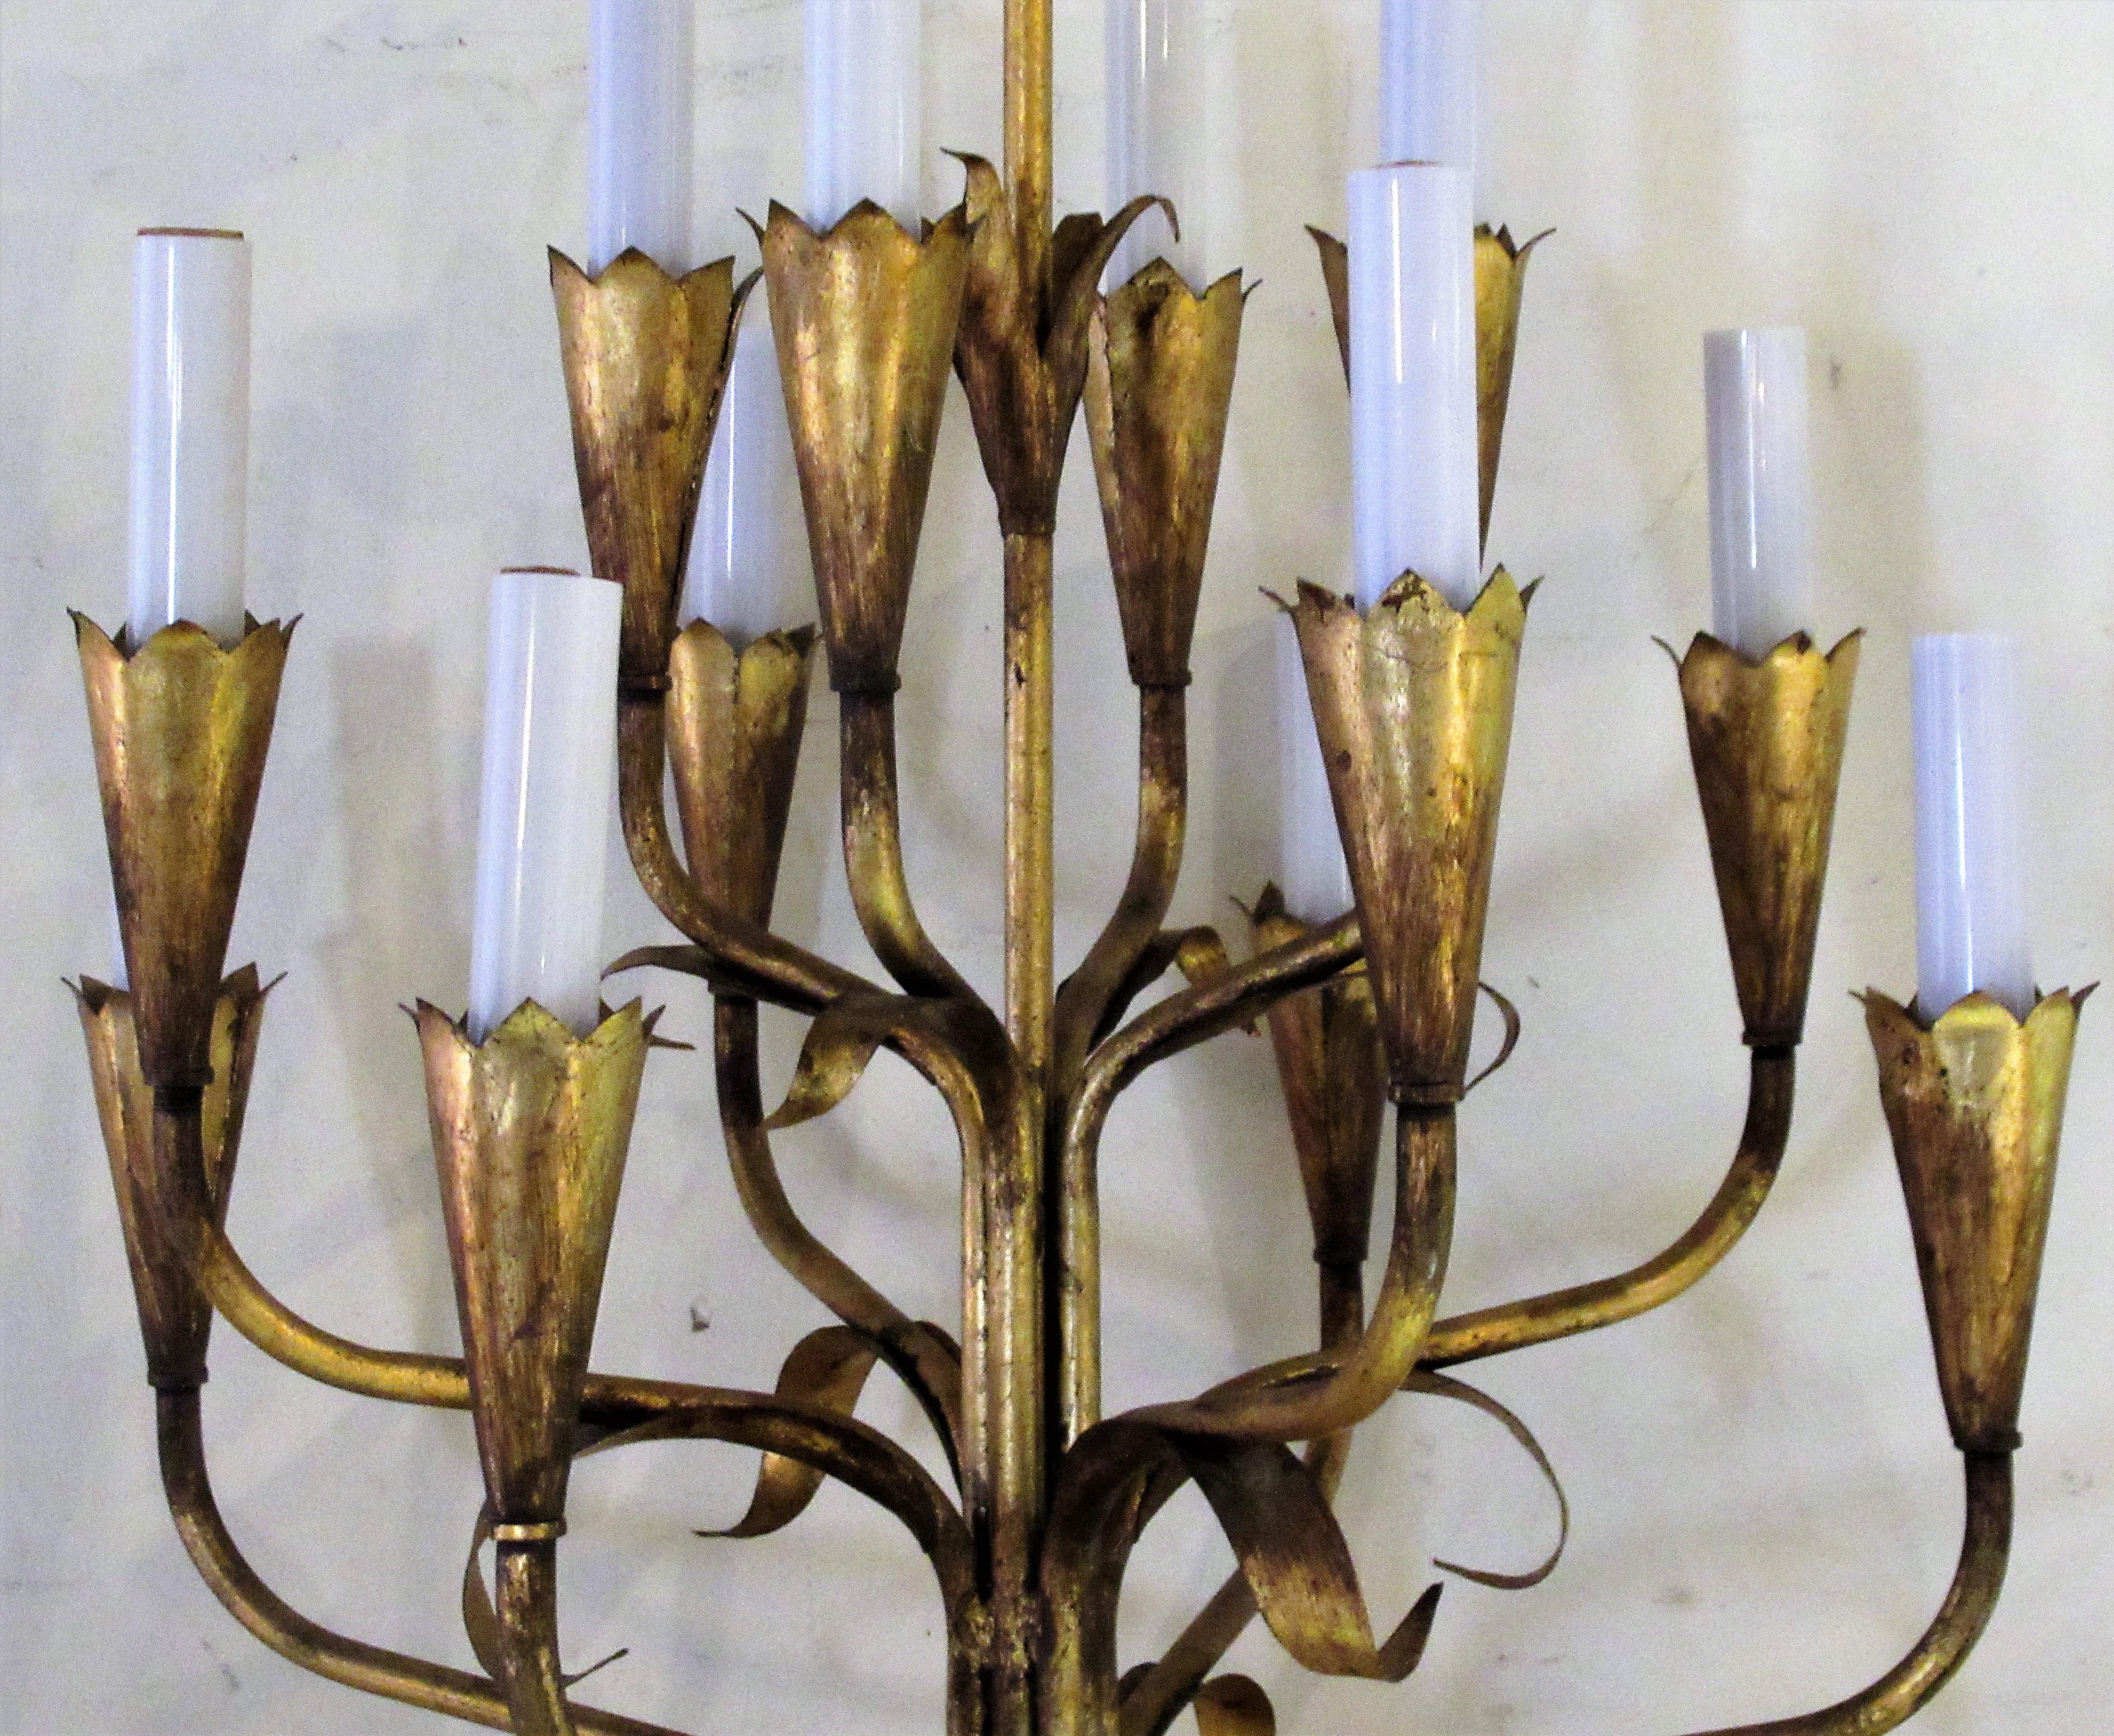  Gilt tole metal leaf form twelve armature candle chandelier with beautiful aged original gilded surface in overall great vintage condition. Old paper label  - Made in Spain - circa 1960.